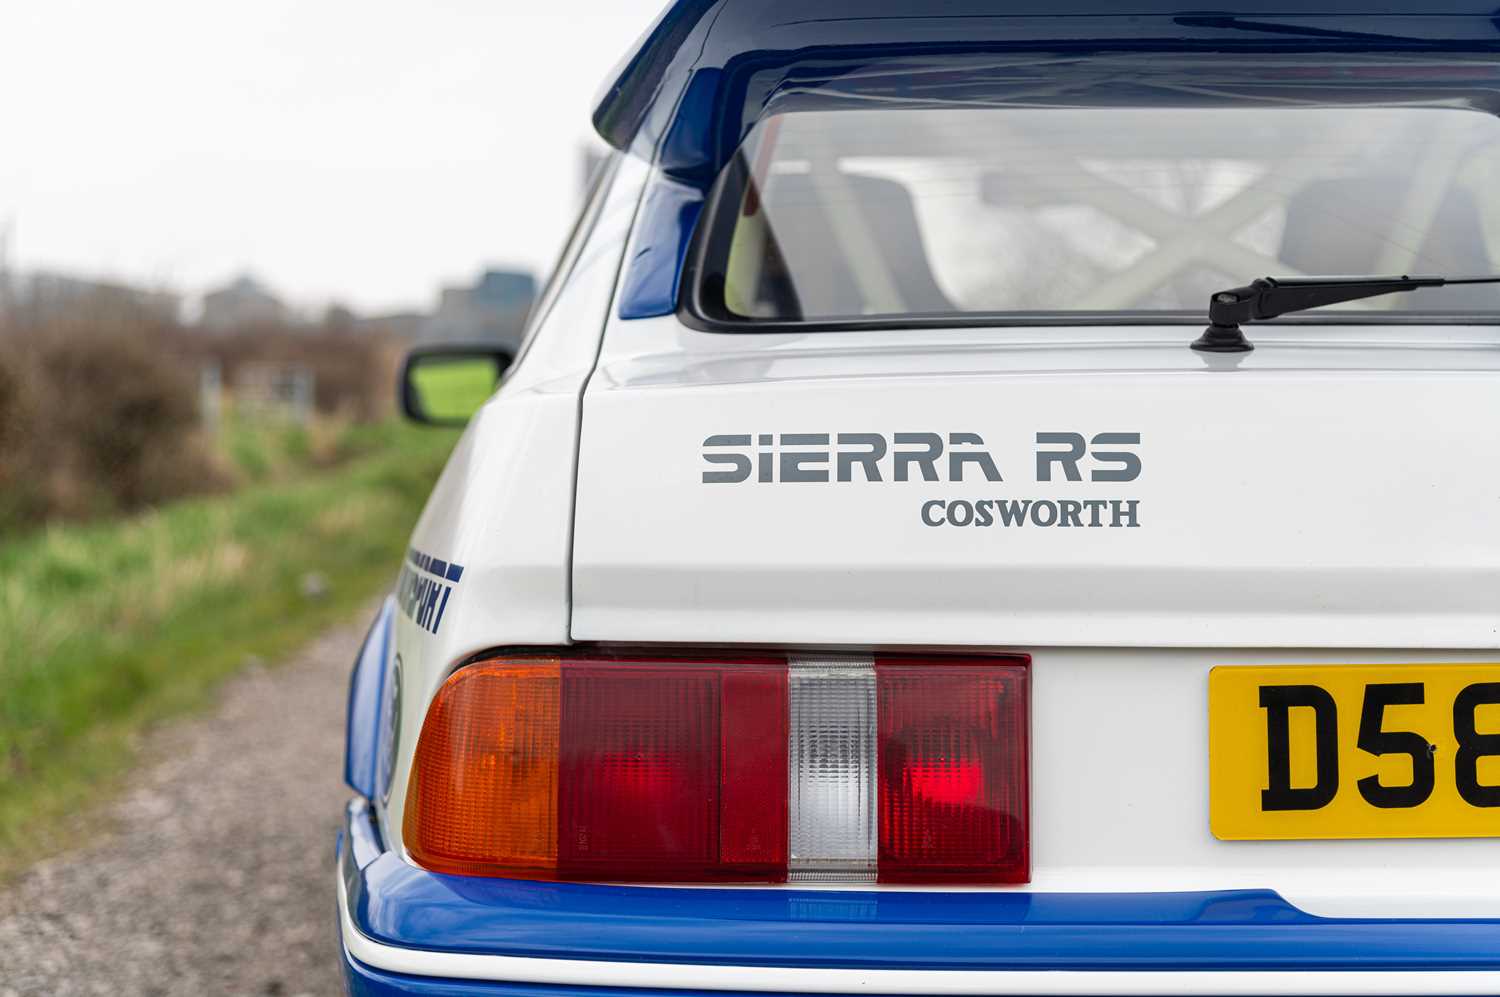 1986 Ford Sierra RS Cosworth - Image 24 of 73